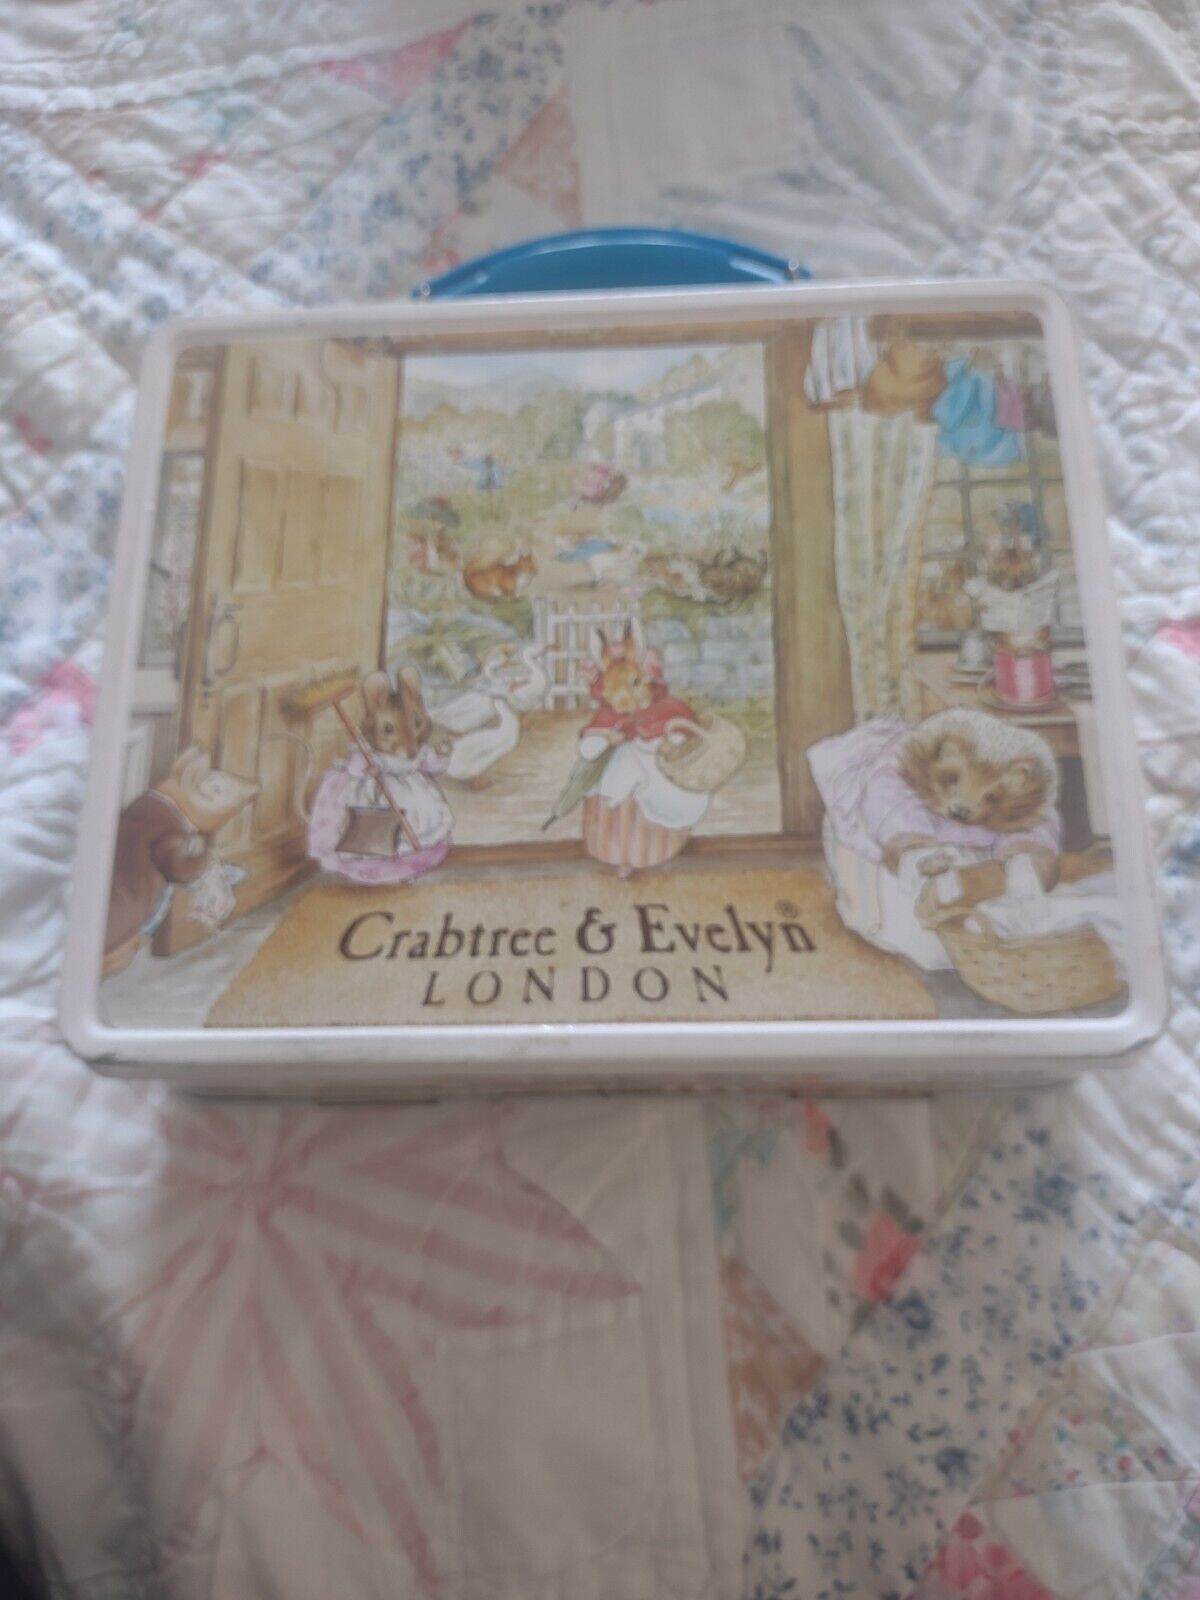 Fanciful, Vintage Crabtree and Evelyn London, lunchbox.